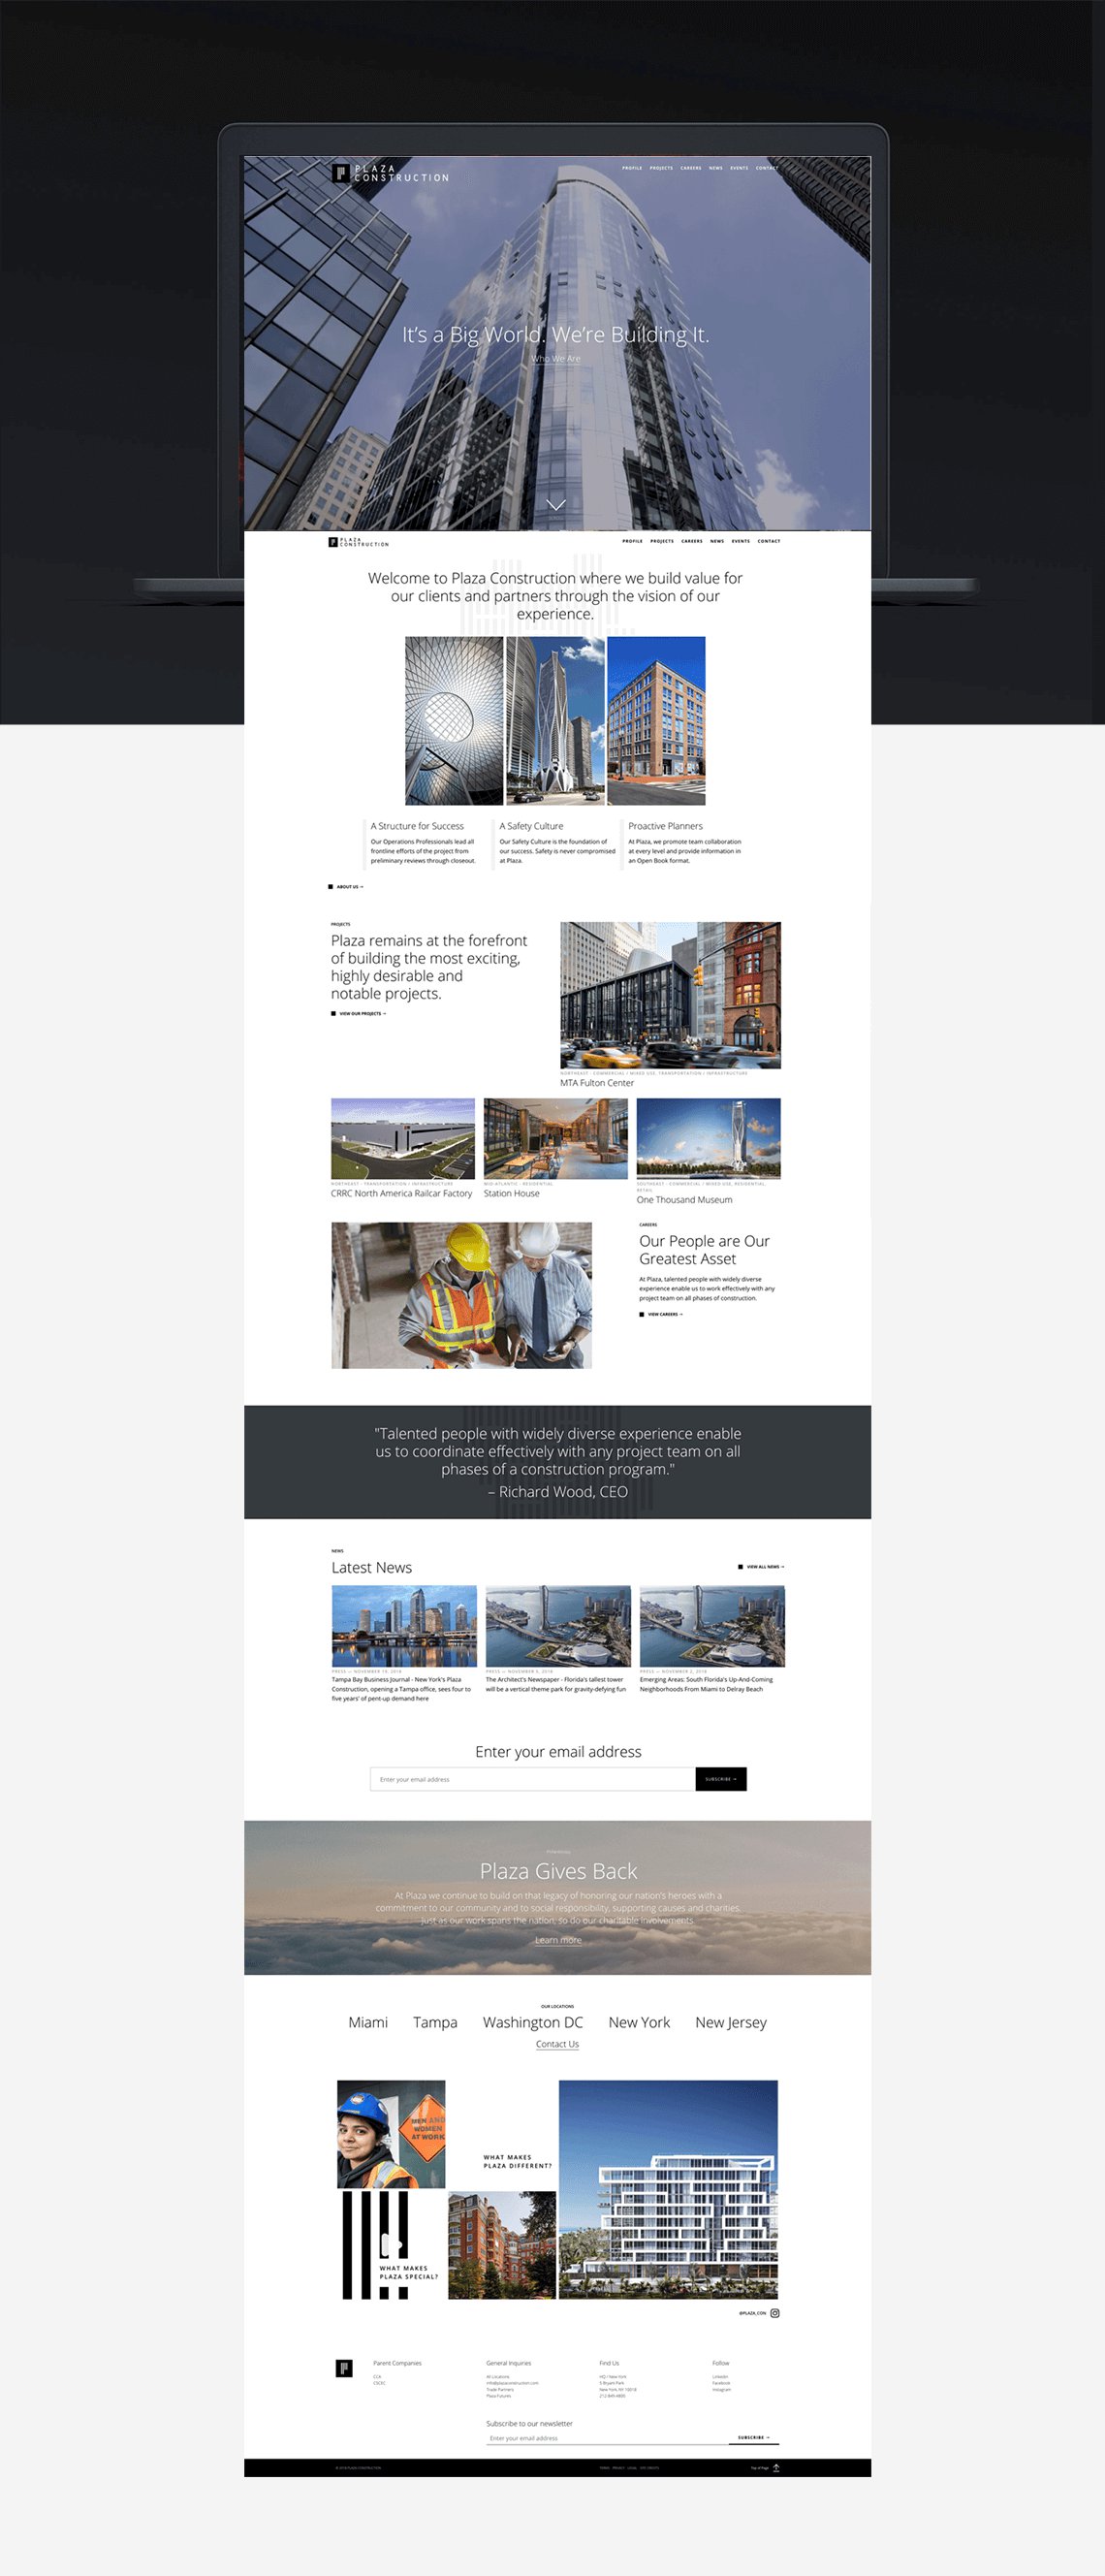 Jacober Creative Brand Identity for Plaza Construction - Photo of new website home page